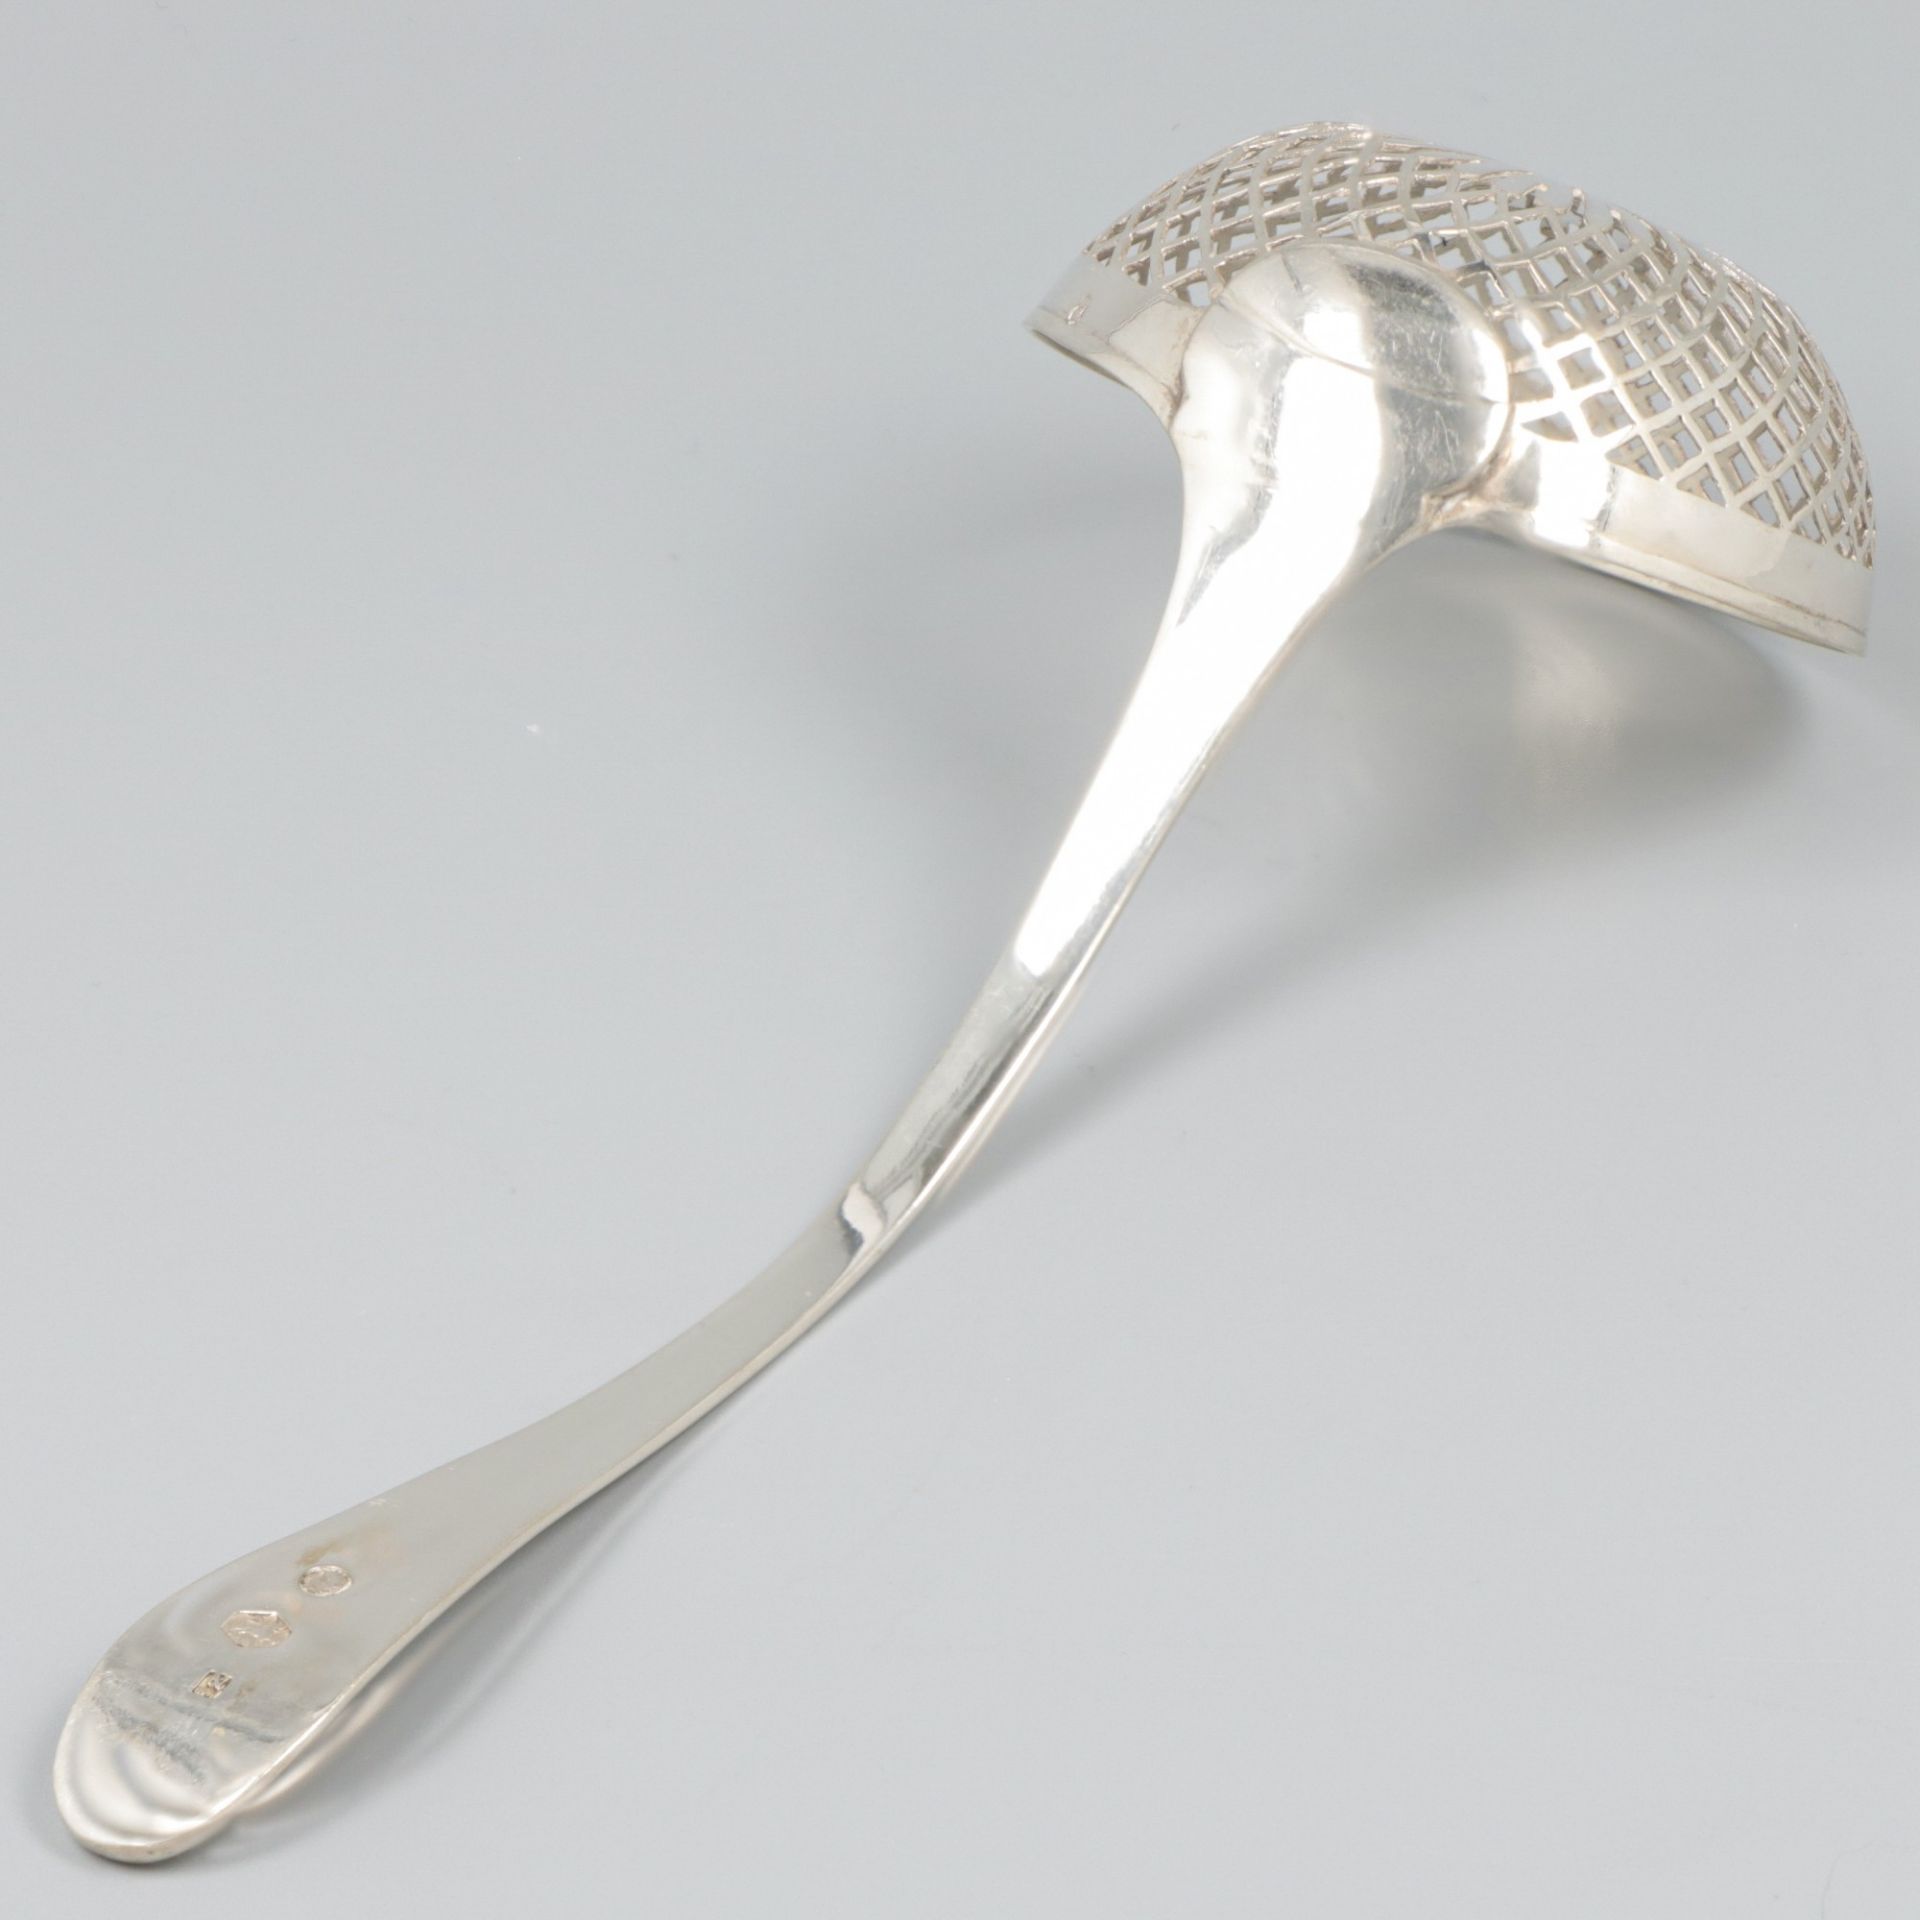 Sifter spoon silver. - Image 2 of 5